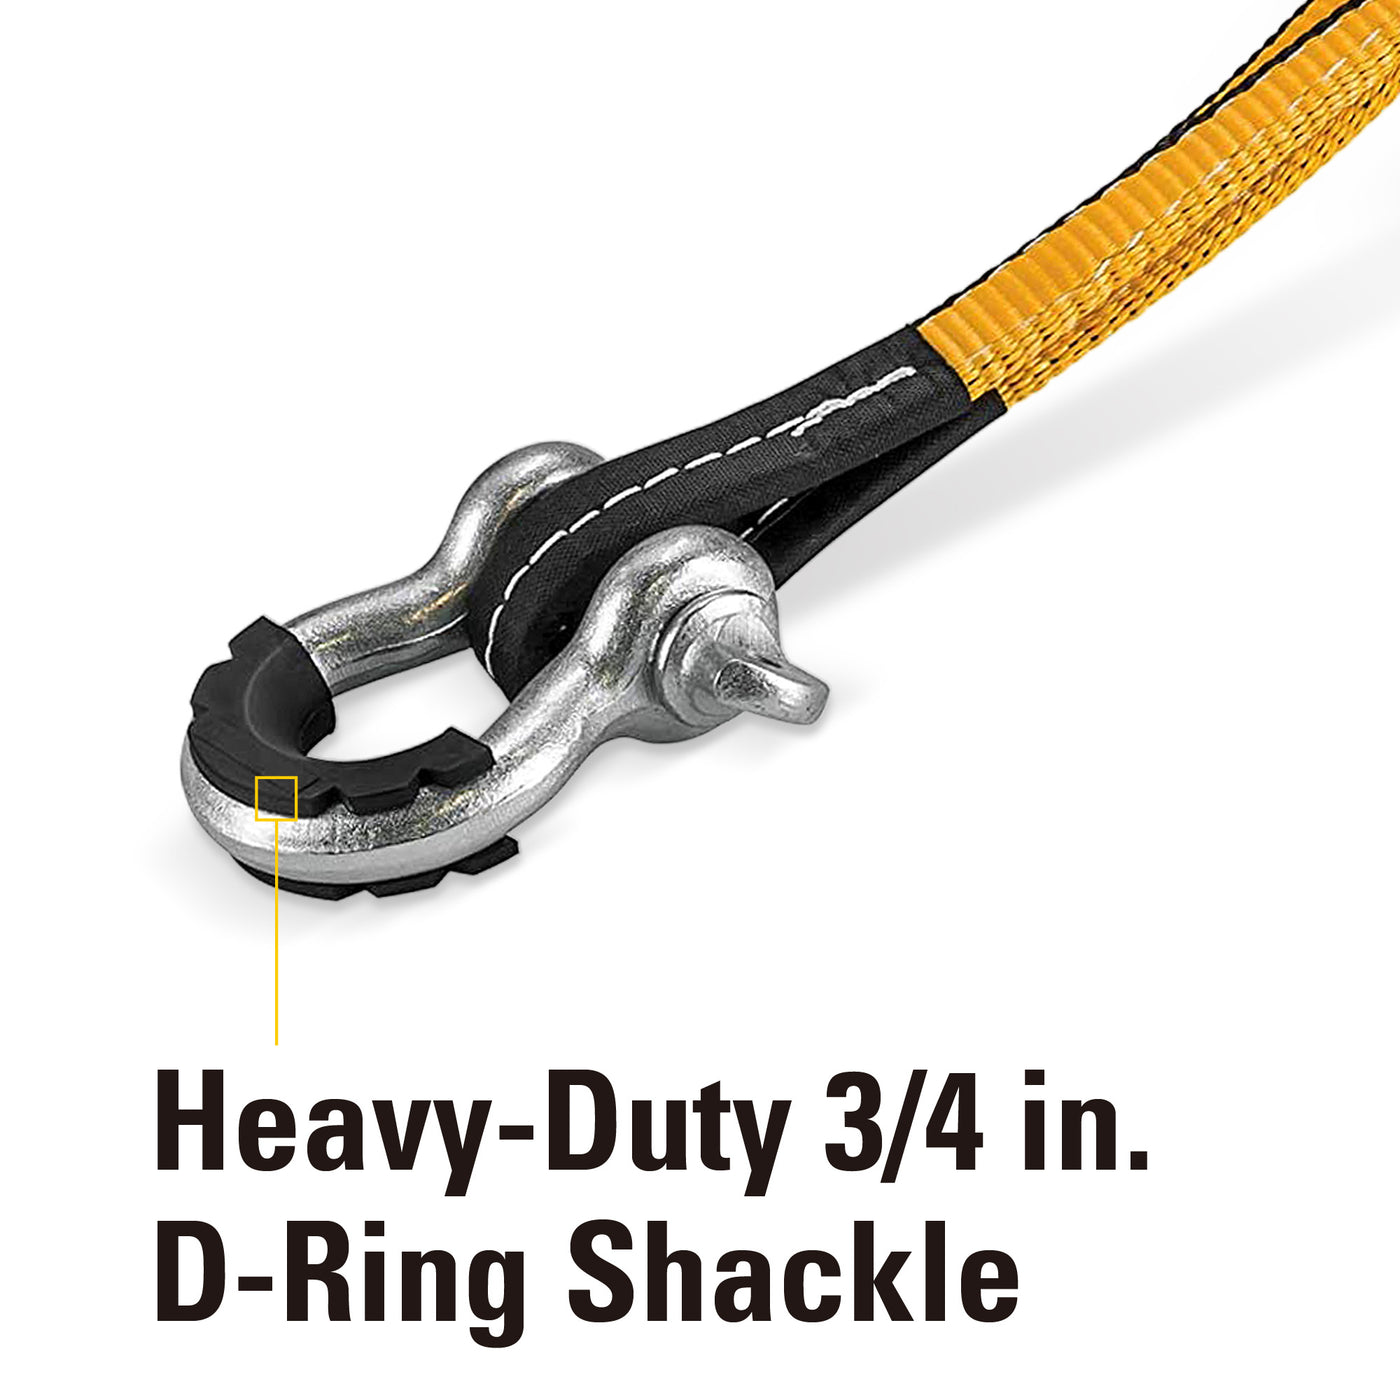 20 foot x 2-inch Tow Strap with D-Ring Shackle 9,000 Lb Capacity